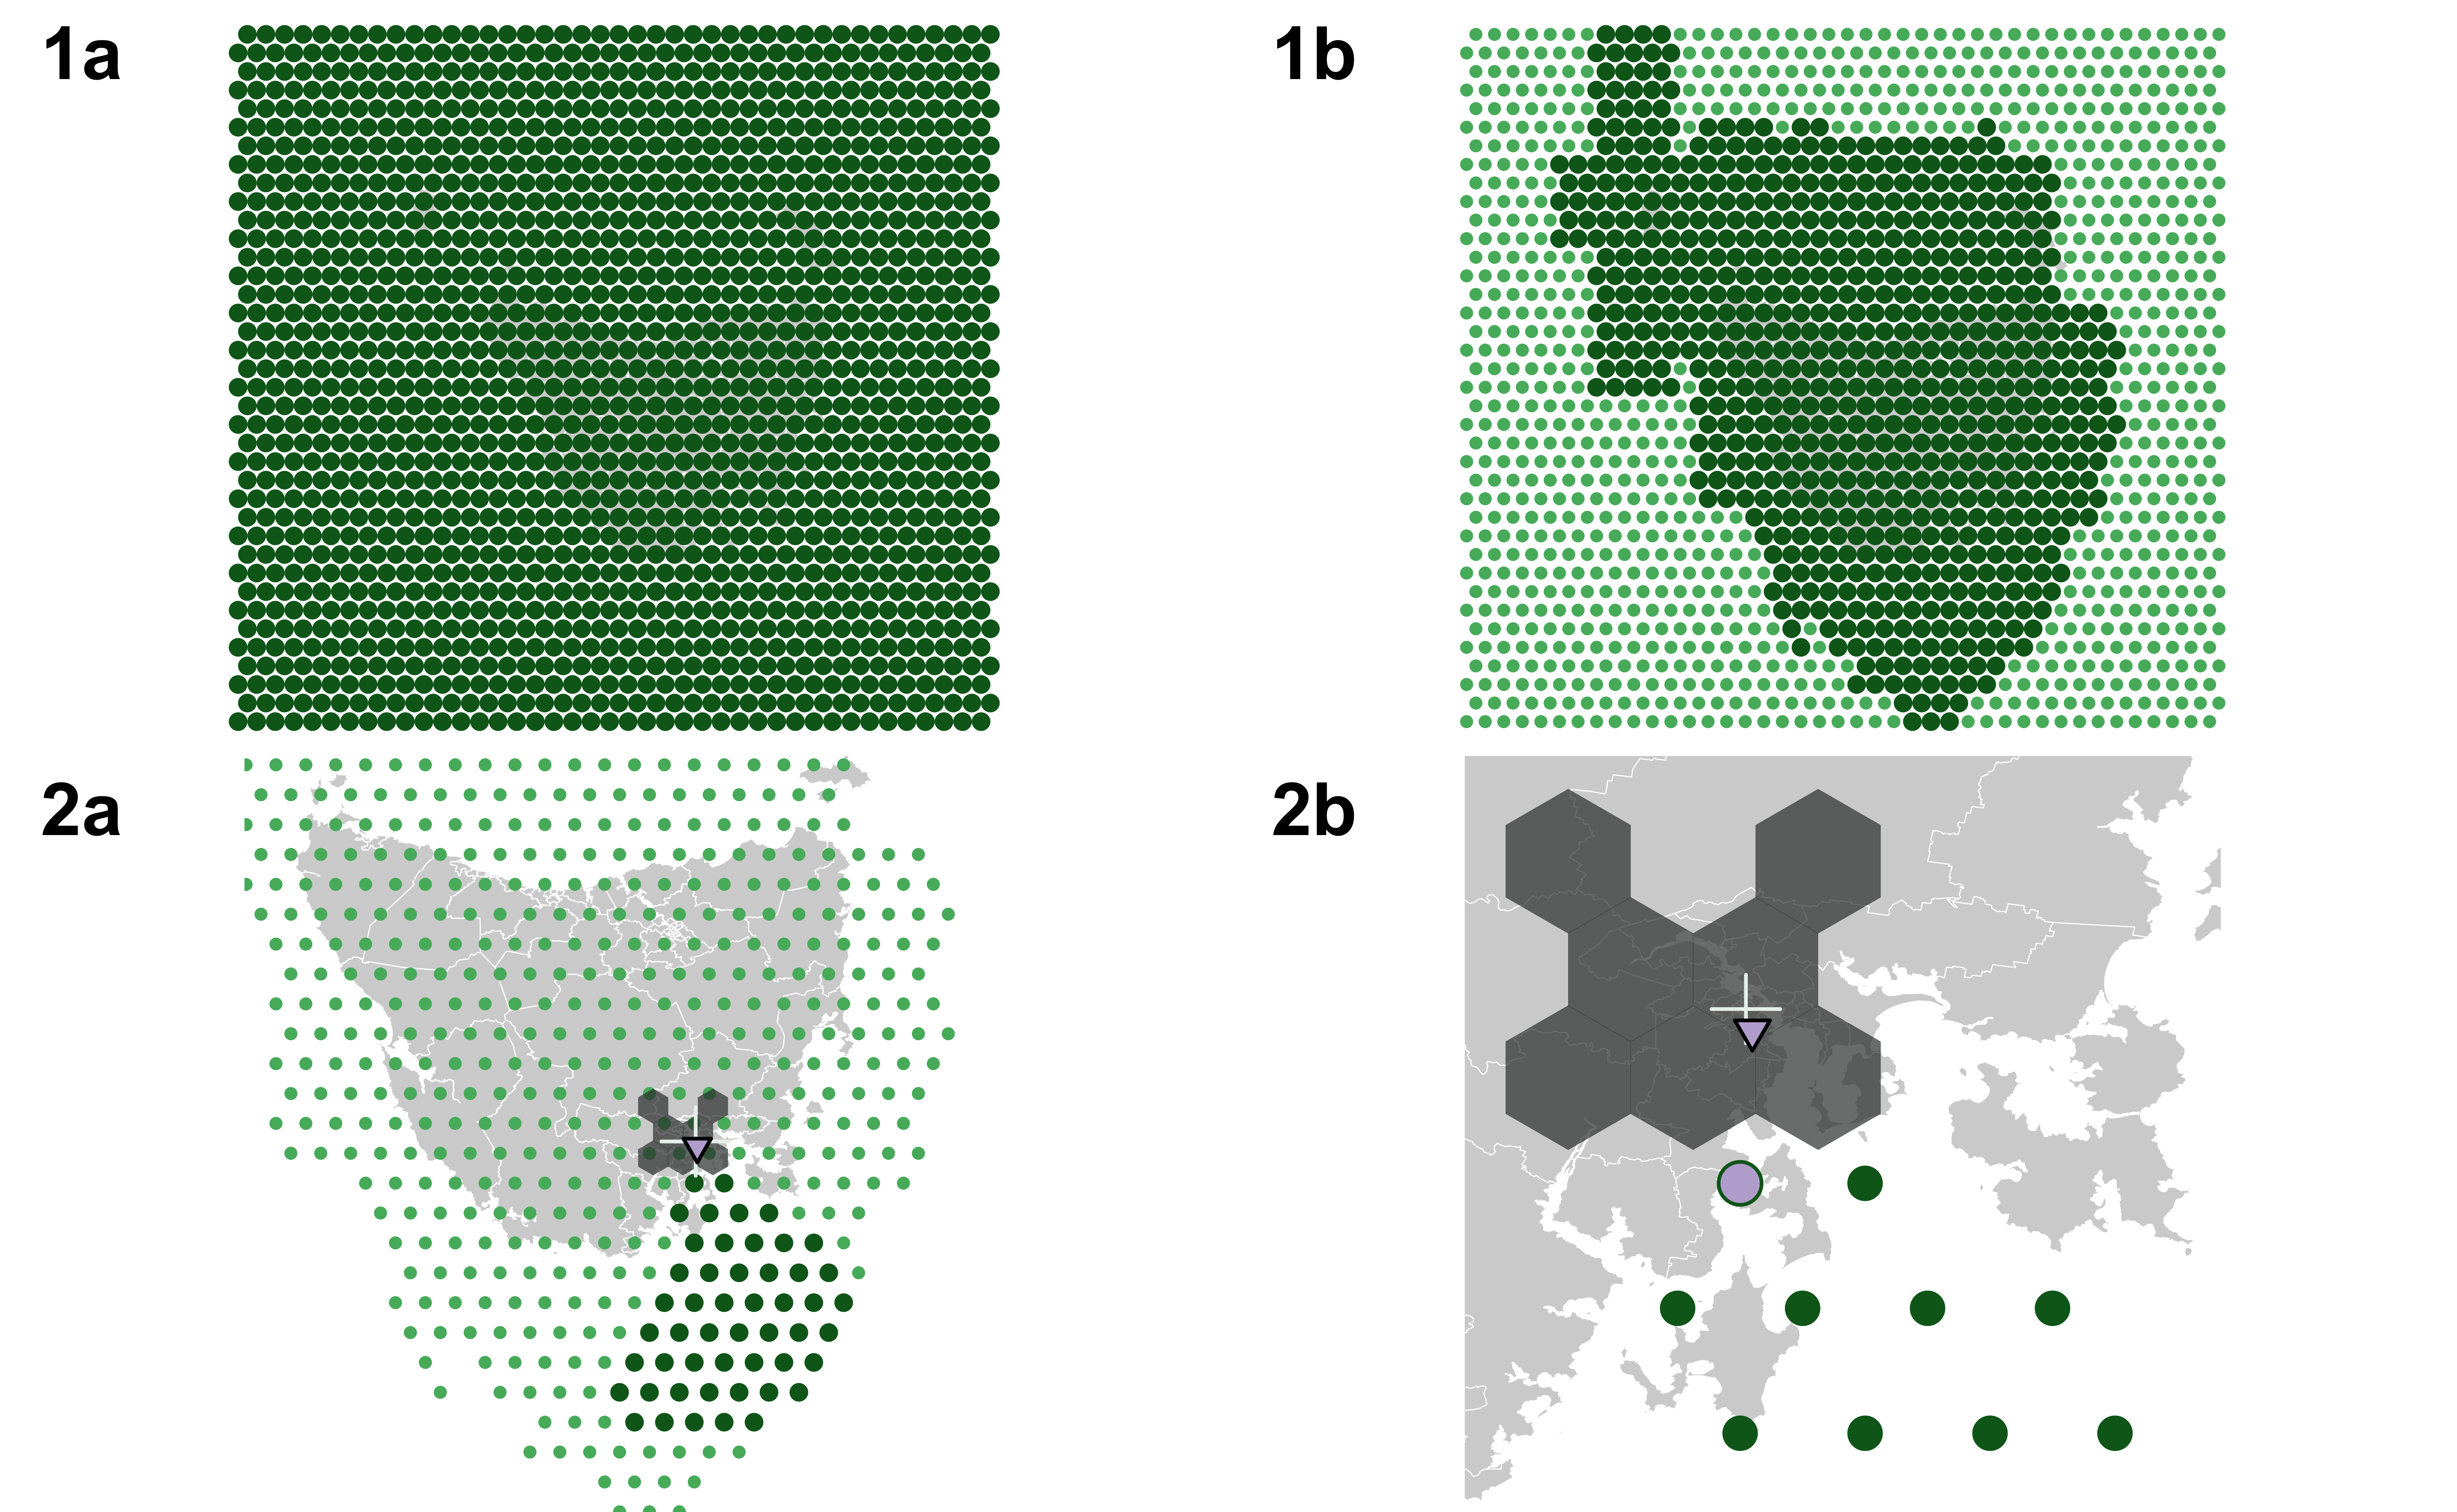 Illustration of key steps of the algorithm: (1a) full hexagon grid is created first; (1b) buffer is applied, shown as dark green circles, to accommodate irregularly shaped regions; (2a, 2b) allocation process, relative the center of Hobart, showing the 8th centroid to be allocated. The relationship between Hobart (the cross) and the centroid (the purple triangle) is used to filter the potential locations from the grid within a wedge. Hexagons already allocated are shown in black, and the purple circle indicates the hexagon to be assigned to the 8th centroid.